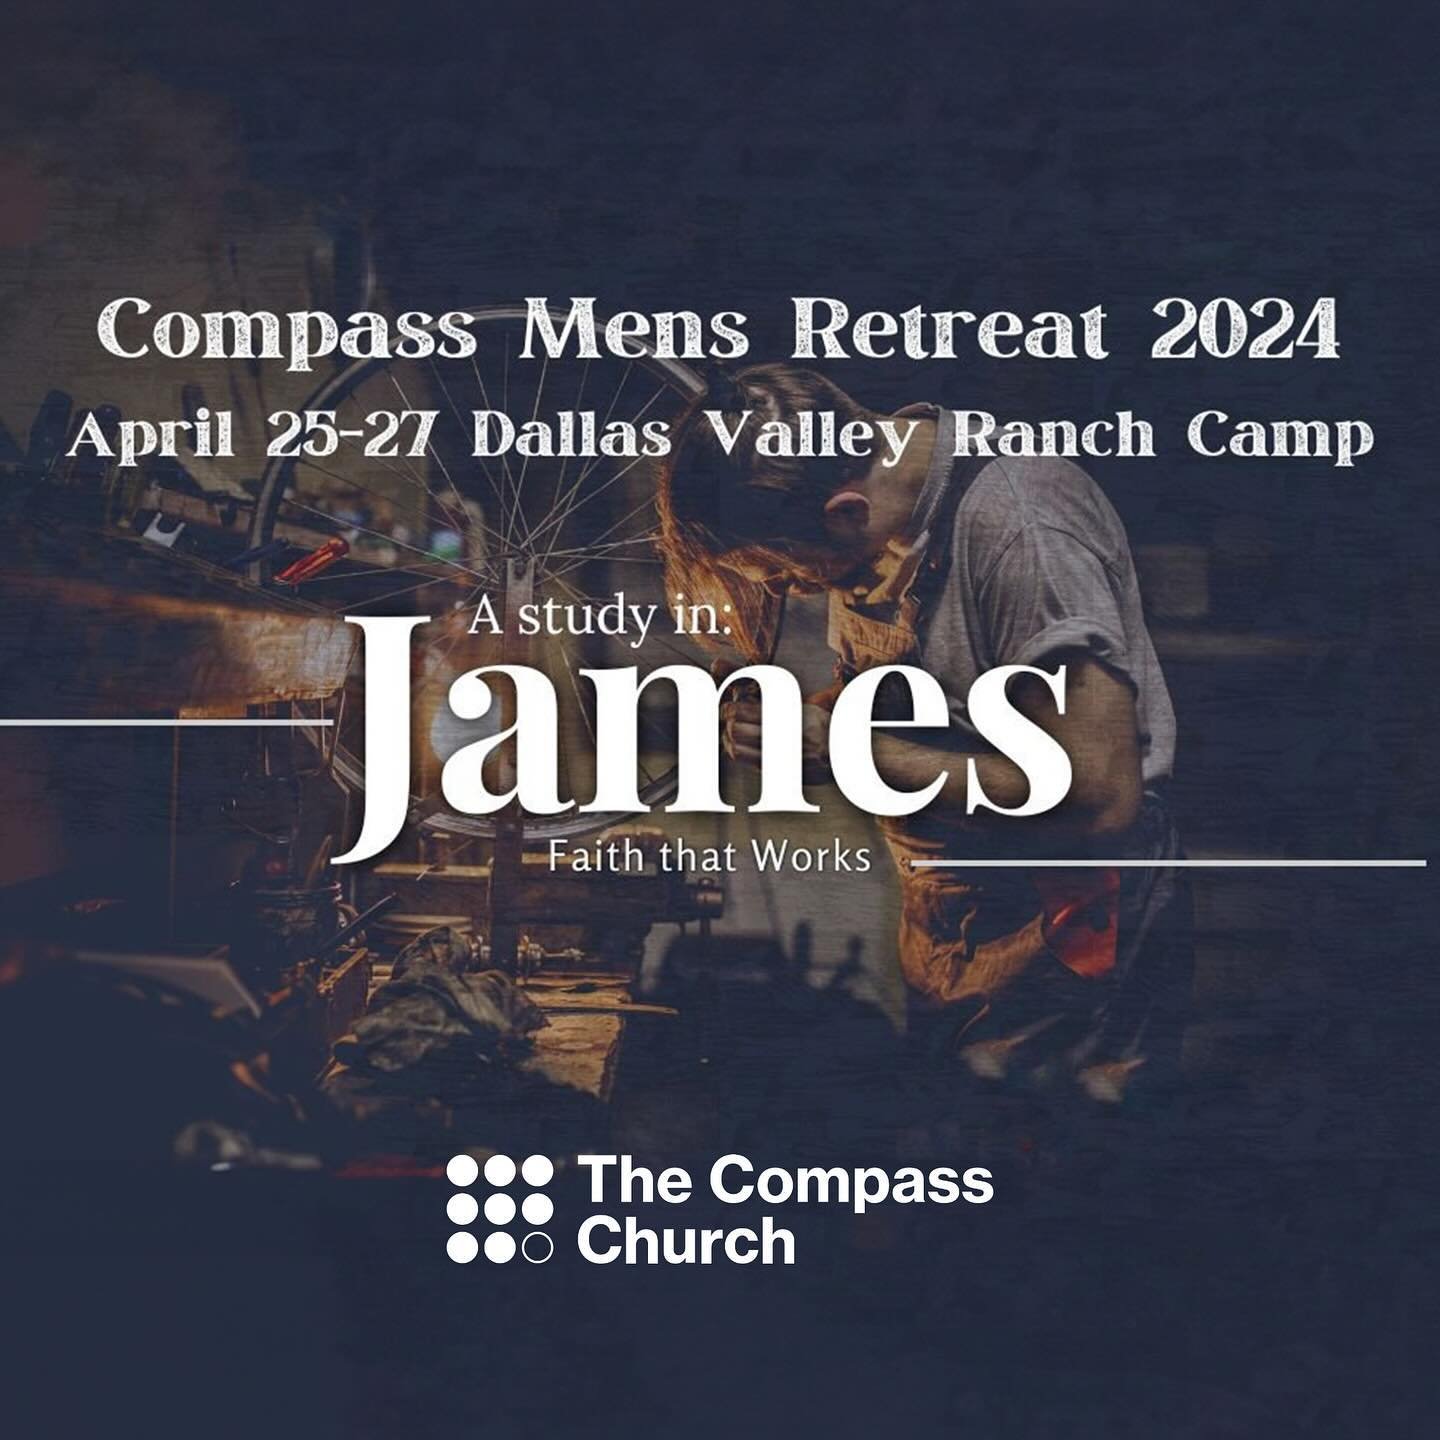 Next week is the Compass Men&rsquo;s Retreat at Dallas Valley Ranch Camp [@dallasvalley]!

We&rsquo;ll be looking at the Biblical book of James together. This book was not written to people living in ease, peace, and comfort. It&rsquo;s quite contrar